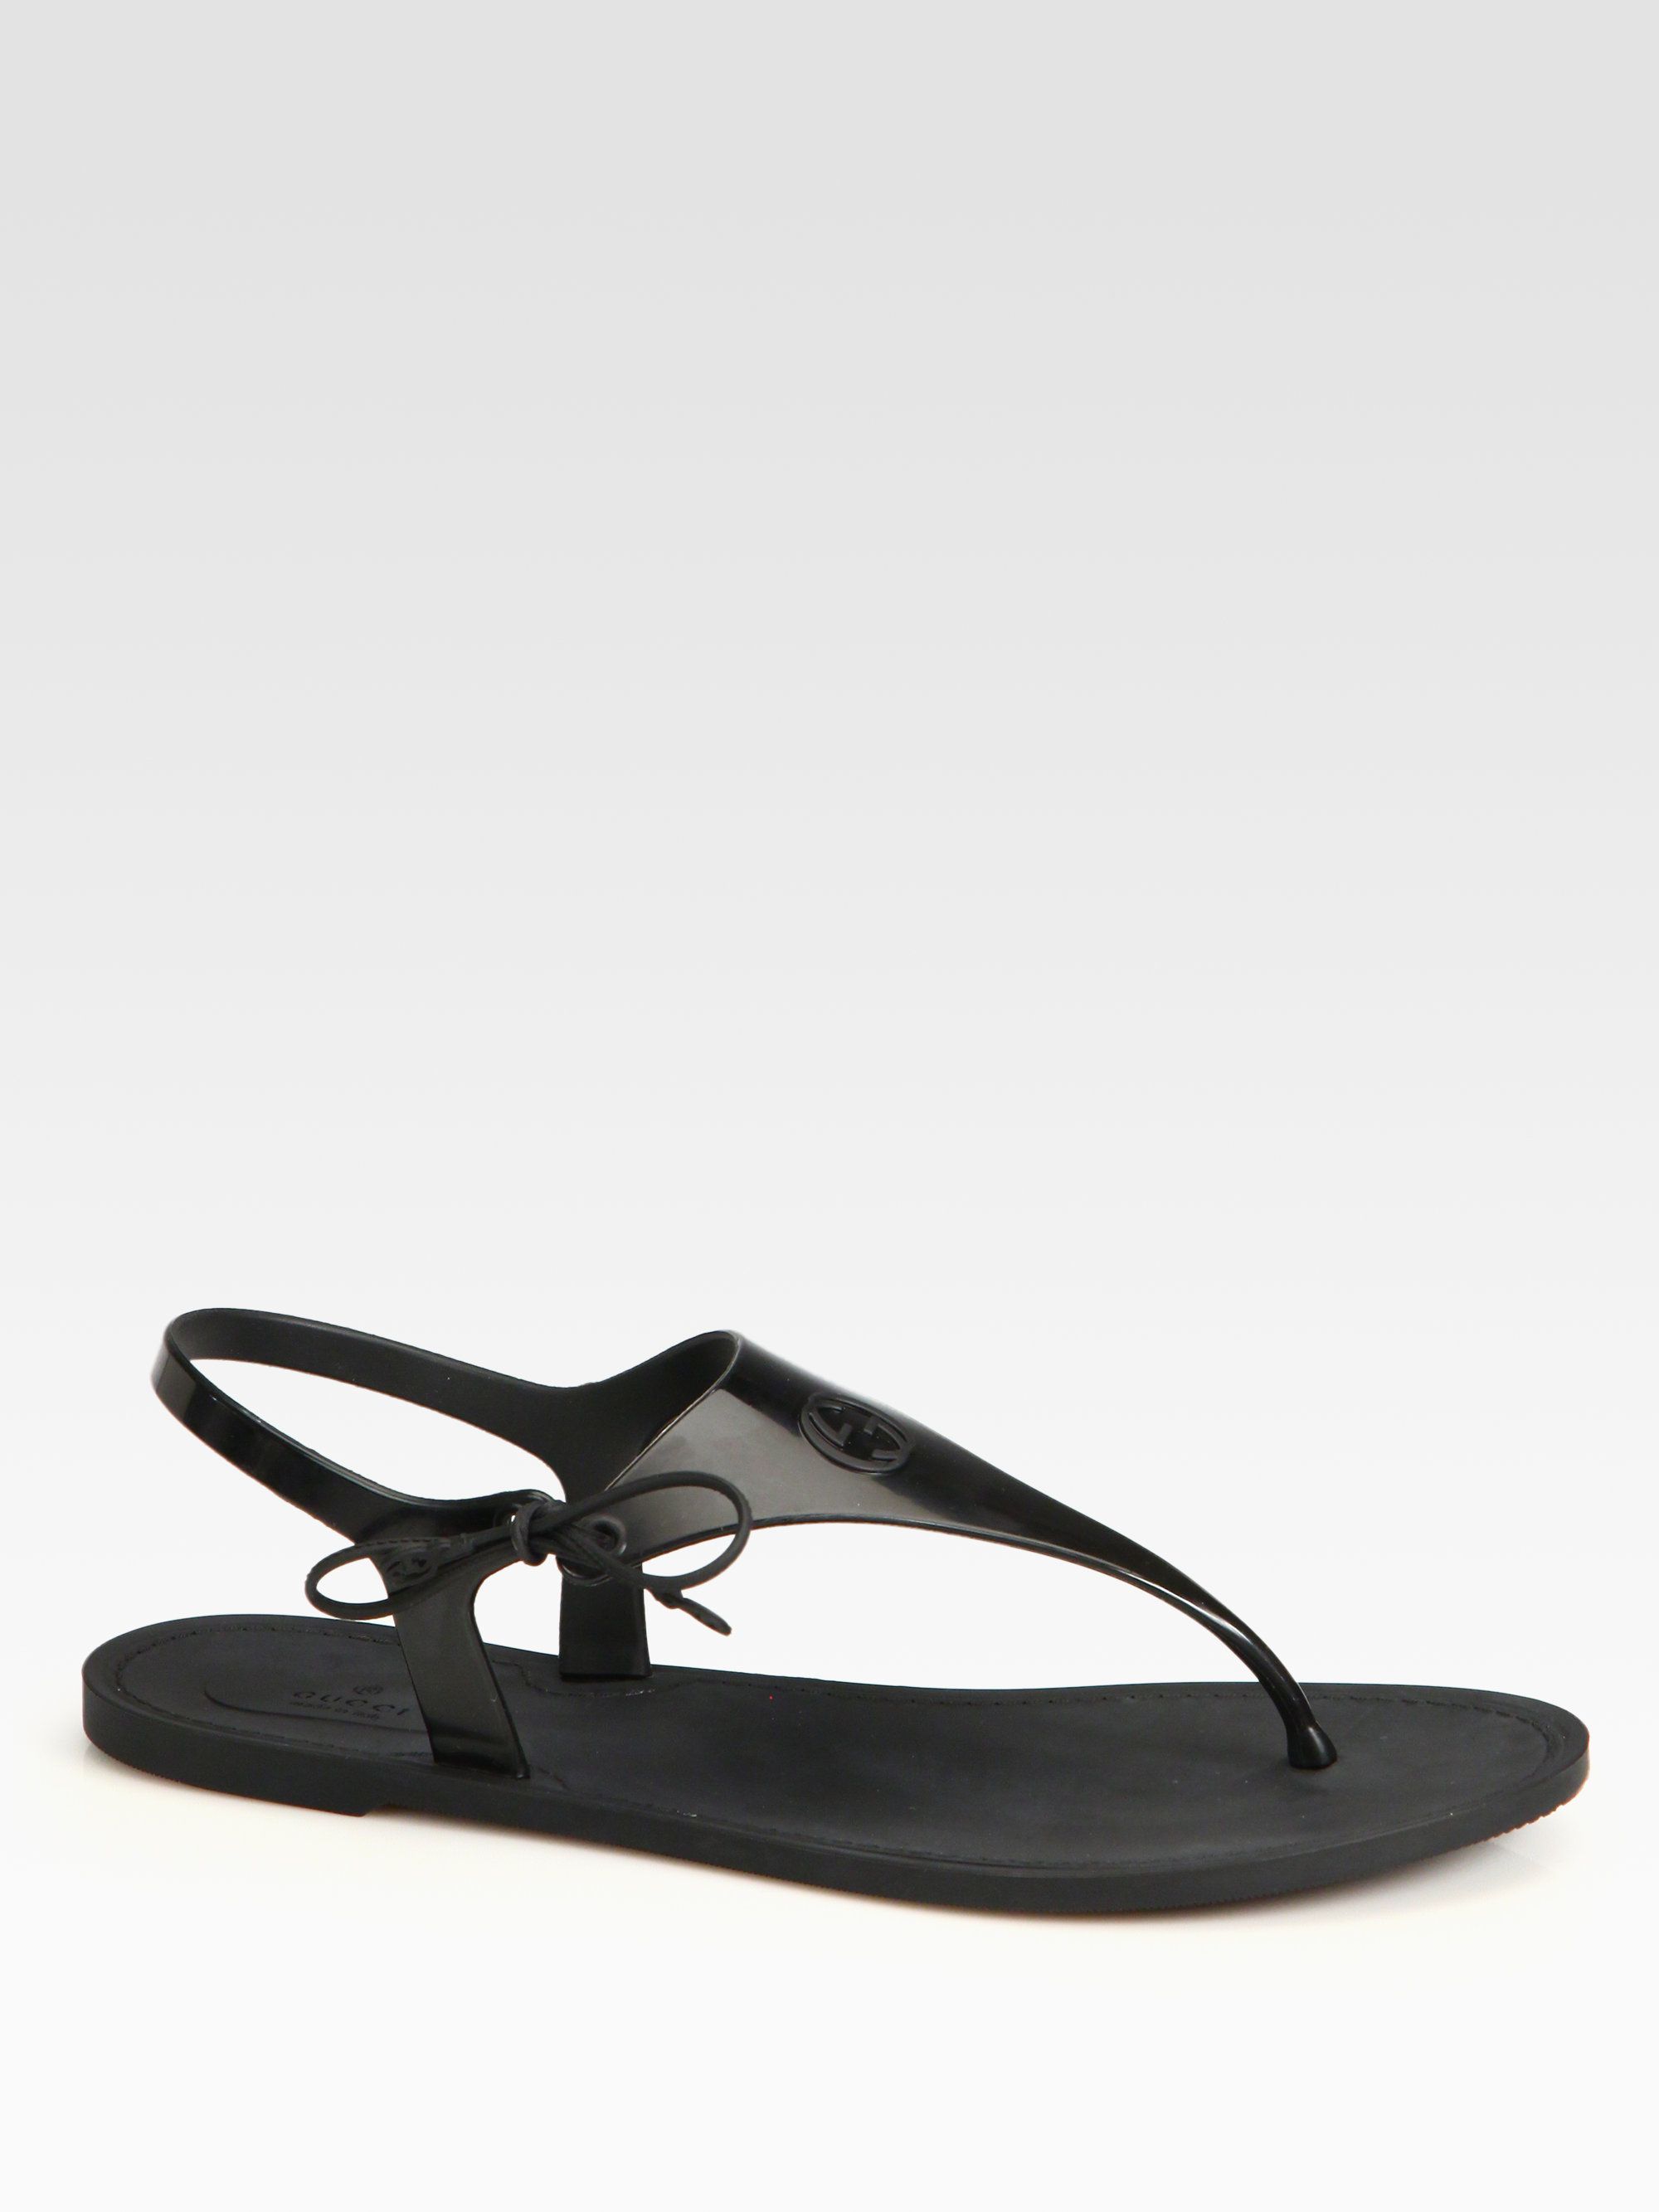 Gucci Katina Rubber Thong Sandals in Black | Lyst